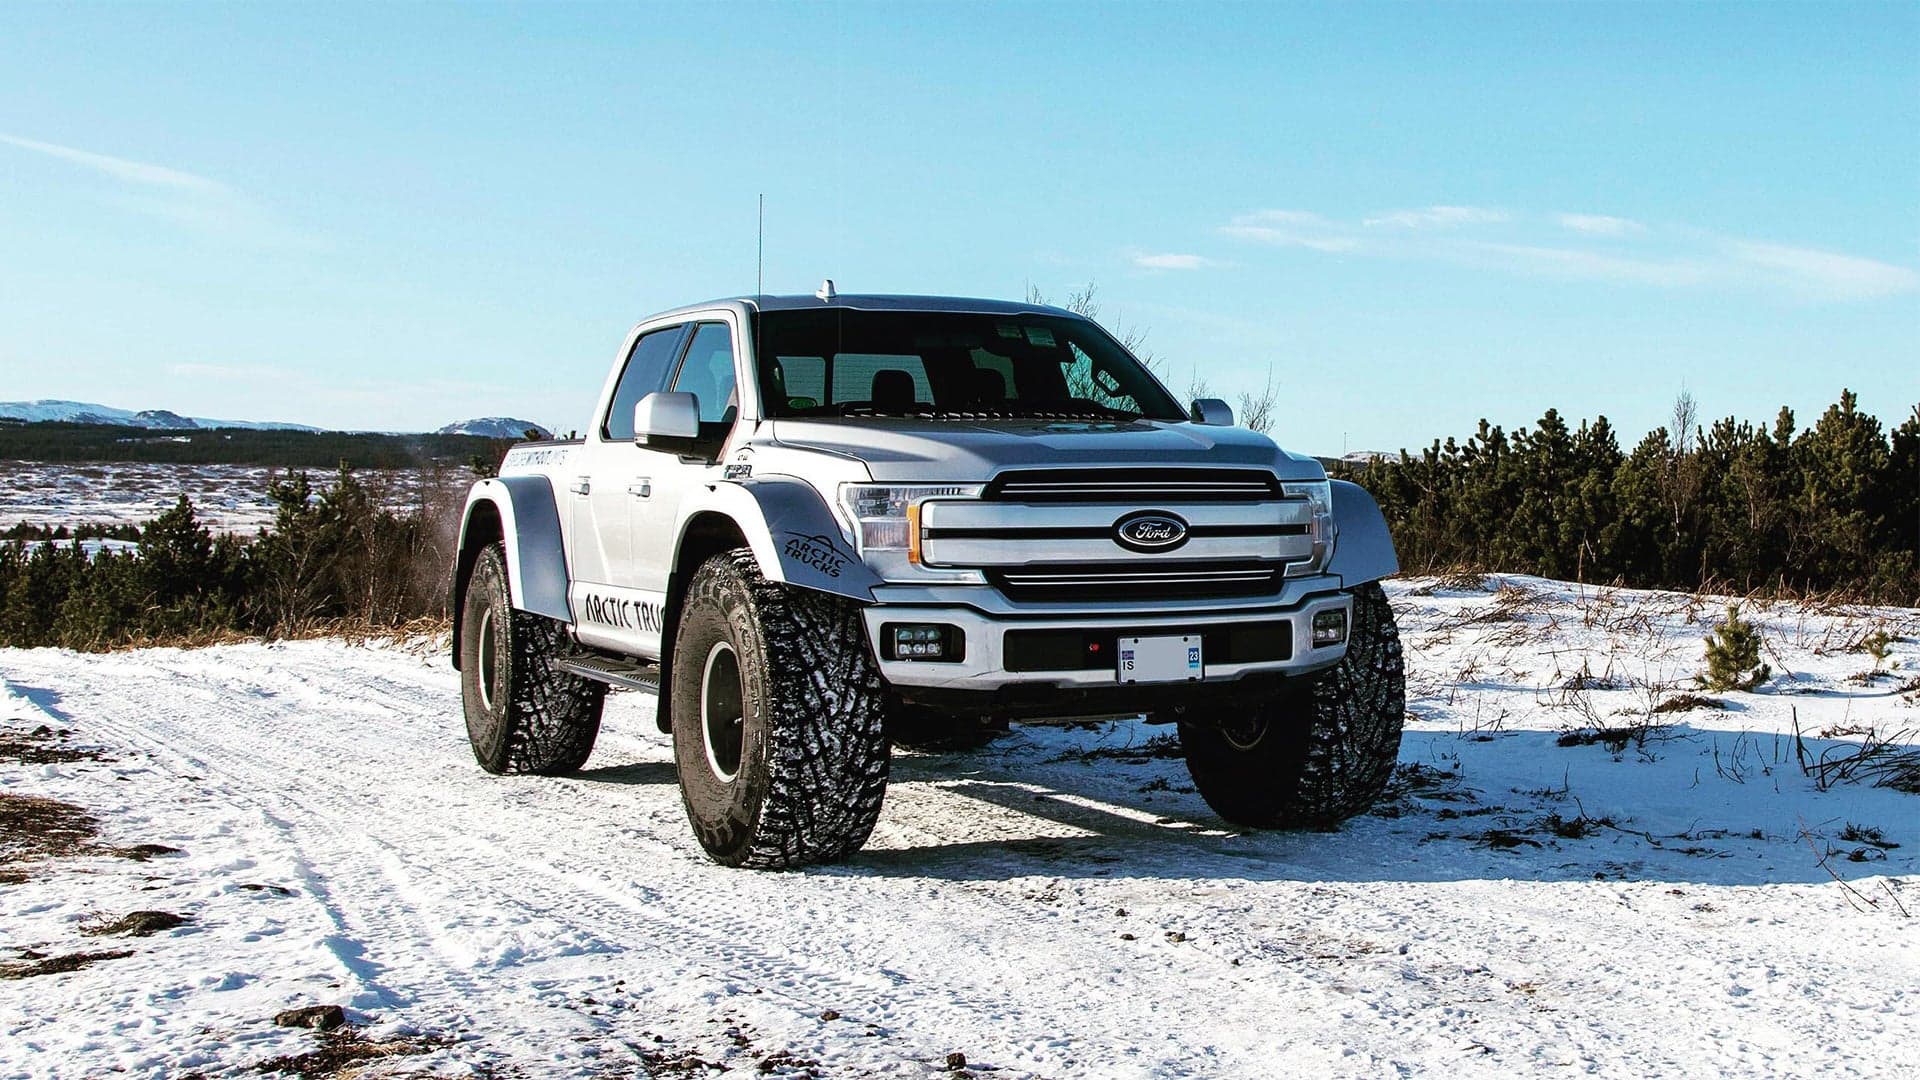 Arctic Trucks’ Ford F-150 Conquers the Poles With Massive 44-Inch Snow Tires